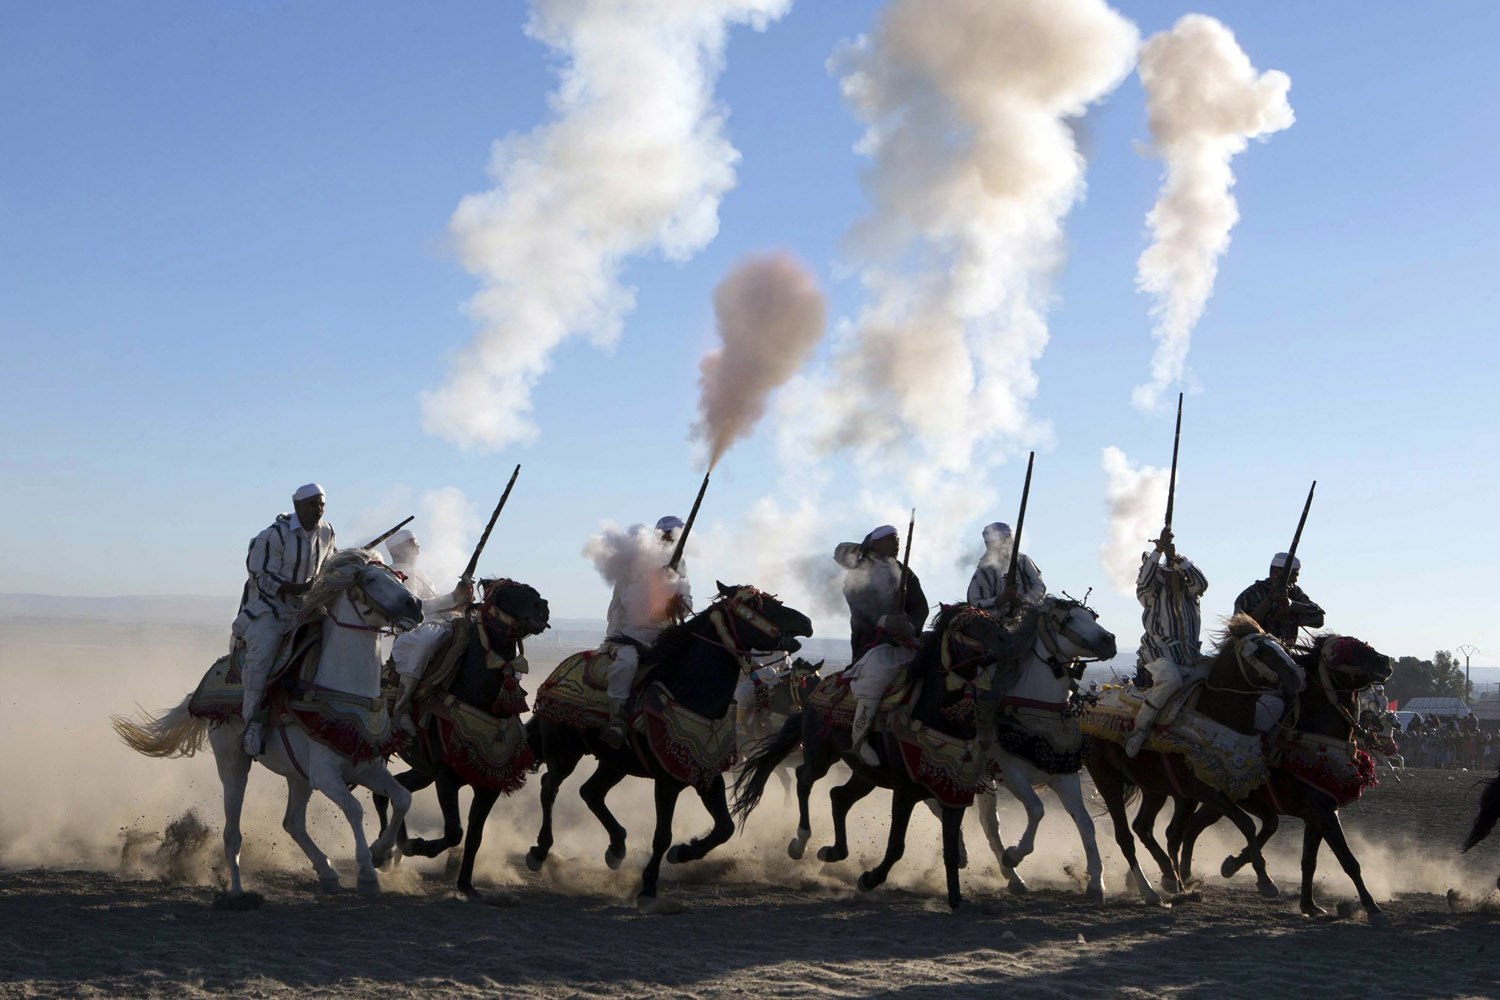 Horse riders perform with guns to celebrate the 38th anniversary of the now famous Green March on Wednesday near city of Fes